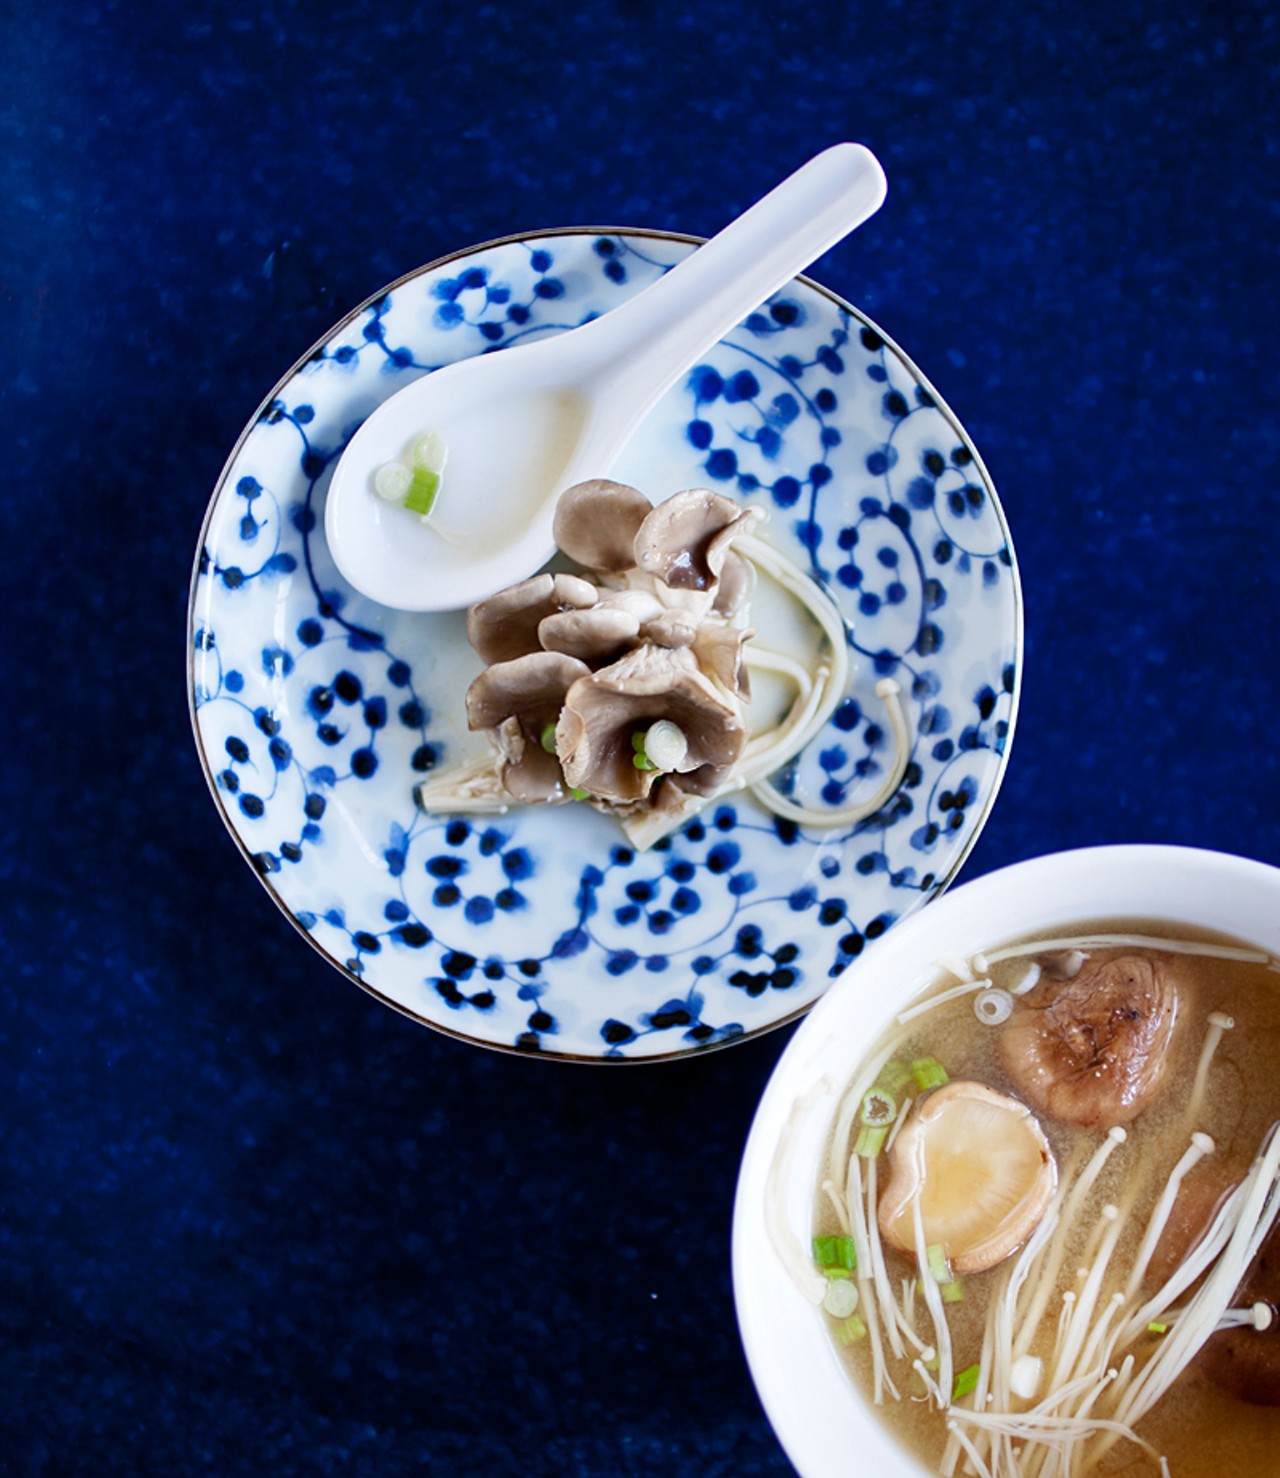 A look at some of those mushrooms that go in the miso soup.